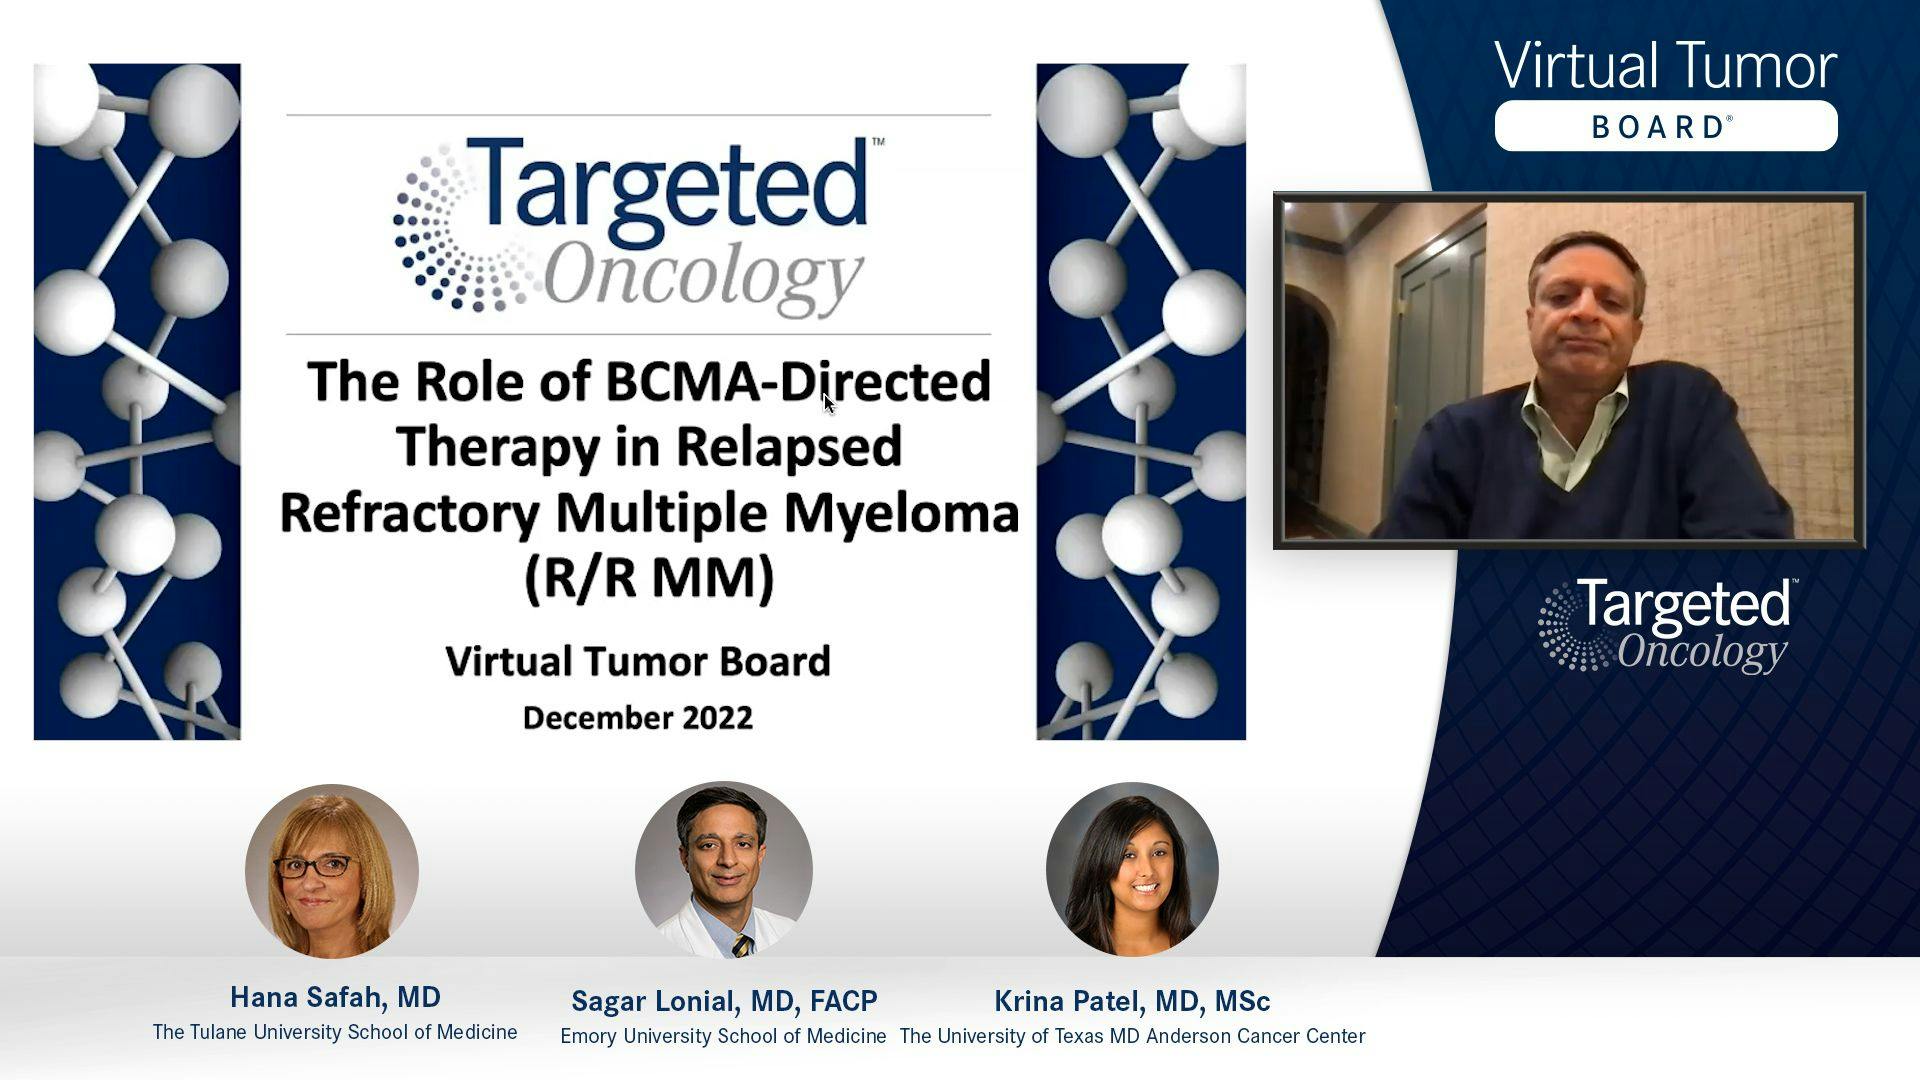 The Role of BCMA-Directed Therapy in Relapsed Refractory Multiple Myeloma (R/R MM)